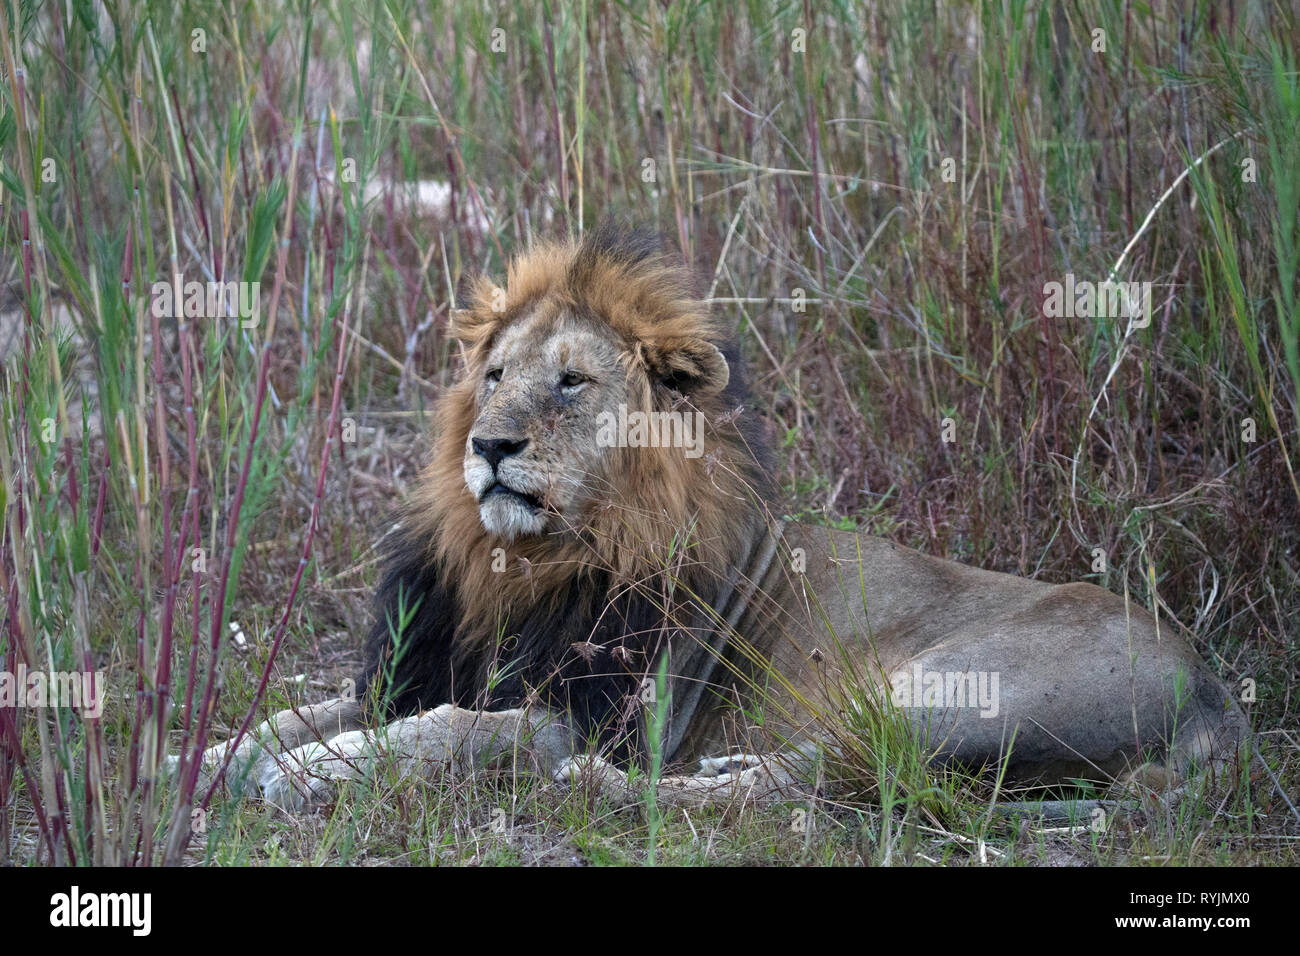 L'Old Lion (Panthera leo). Parco Nazionale di Kruger. Sudafrica. Foto Stock